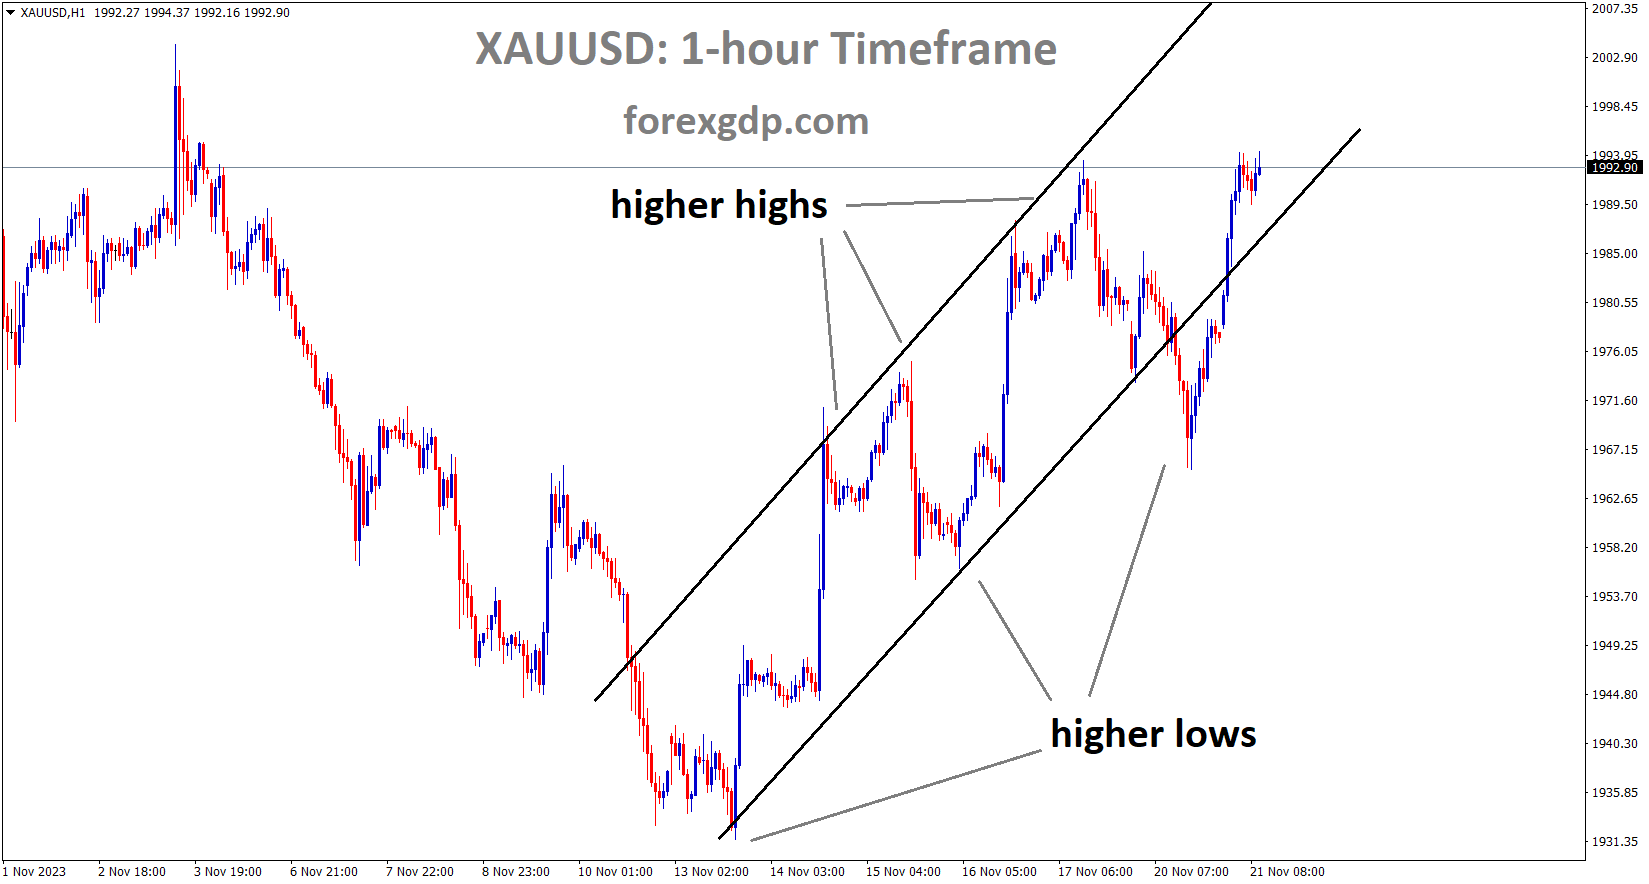 XAUUSD Gold price is moving in an Ascending channel and the market has rebounded from the higher low area of the channel